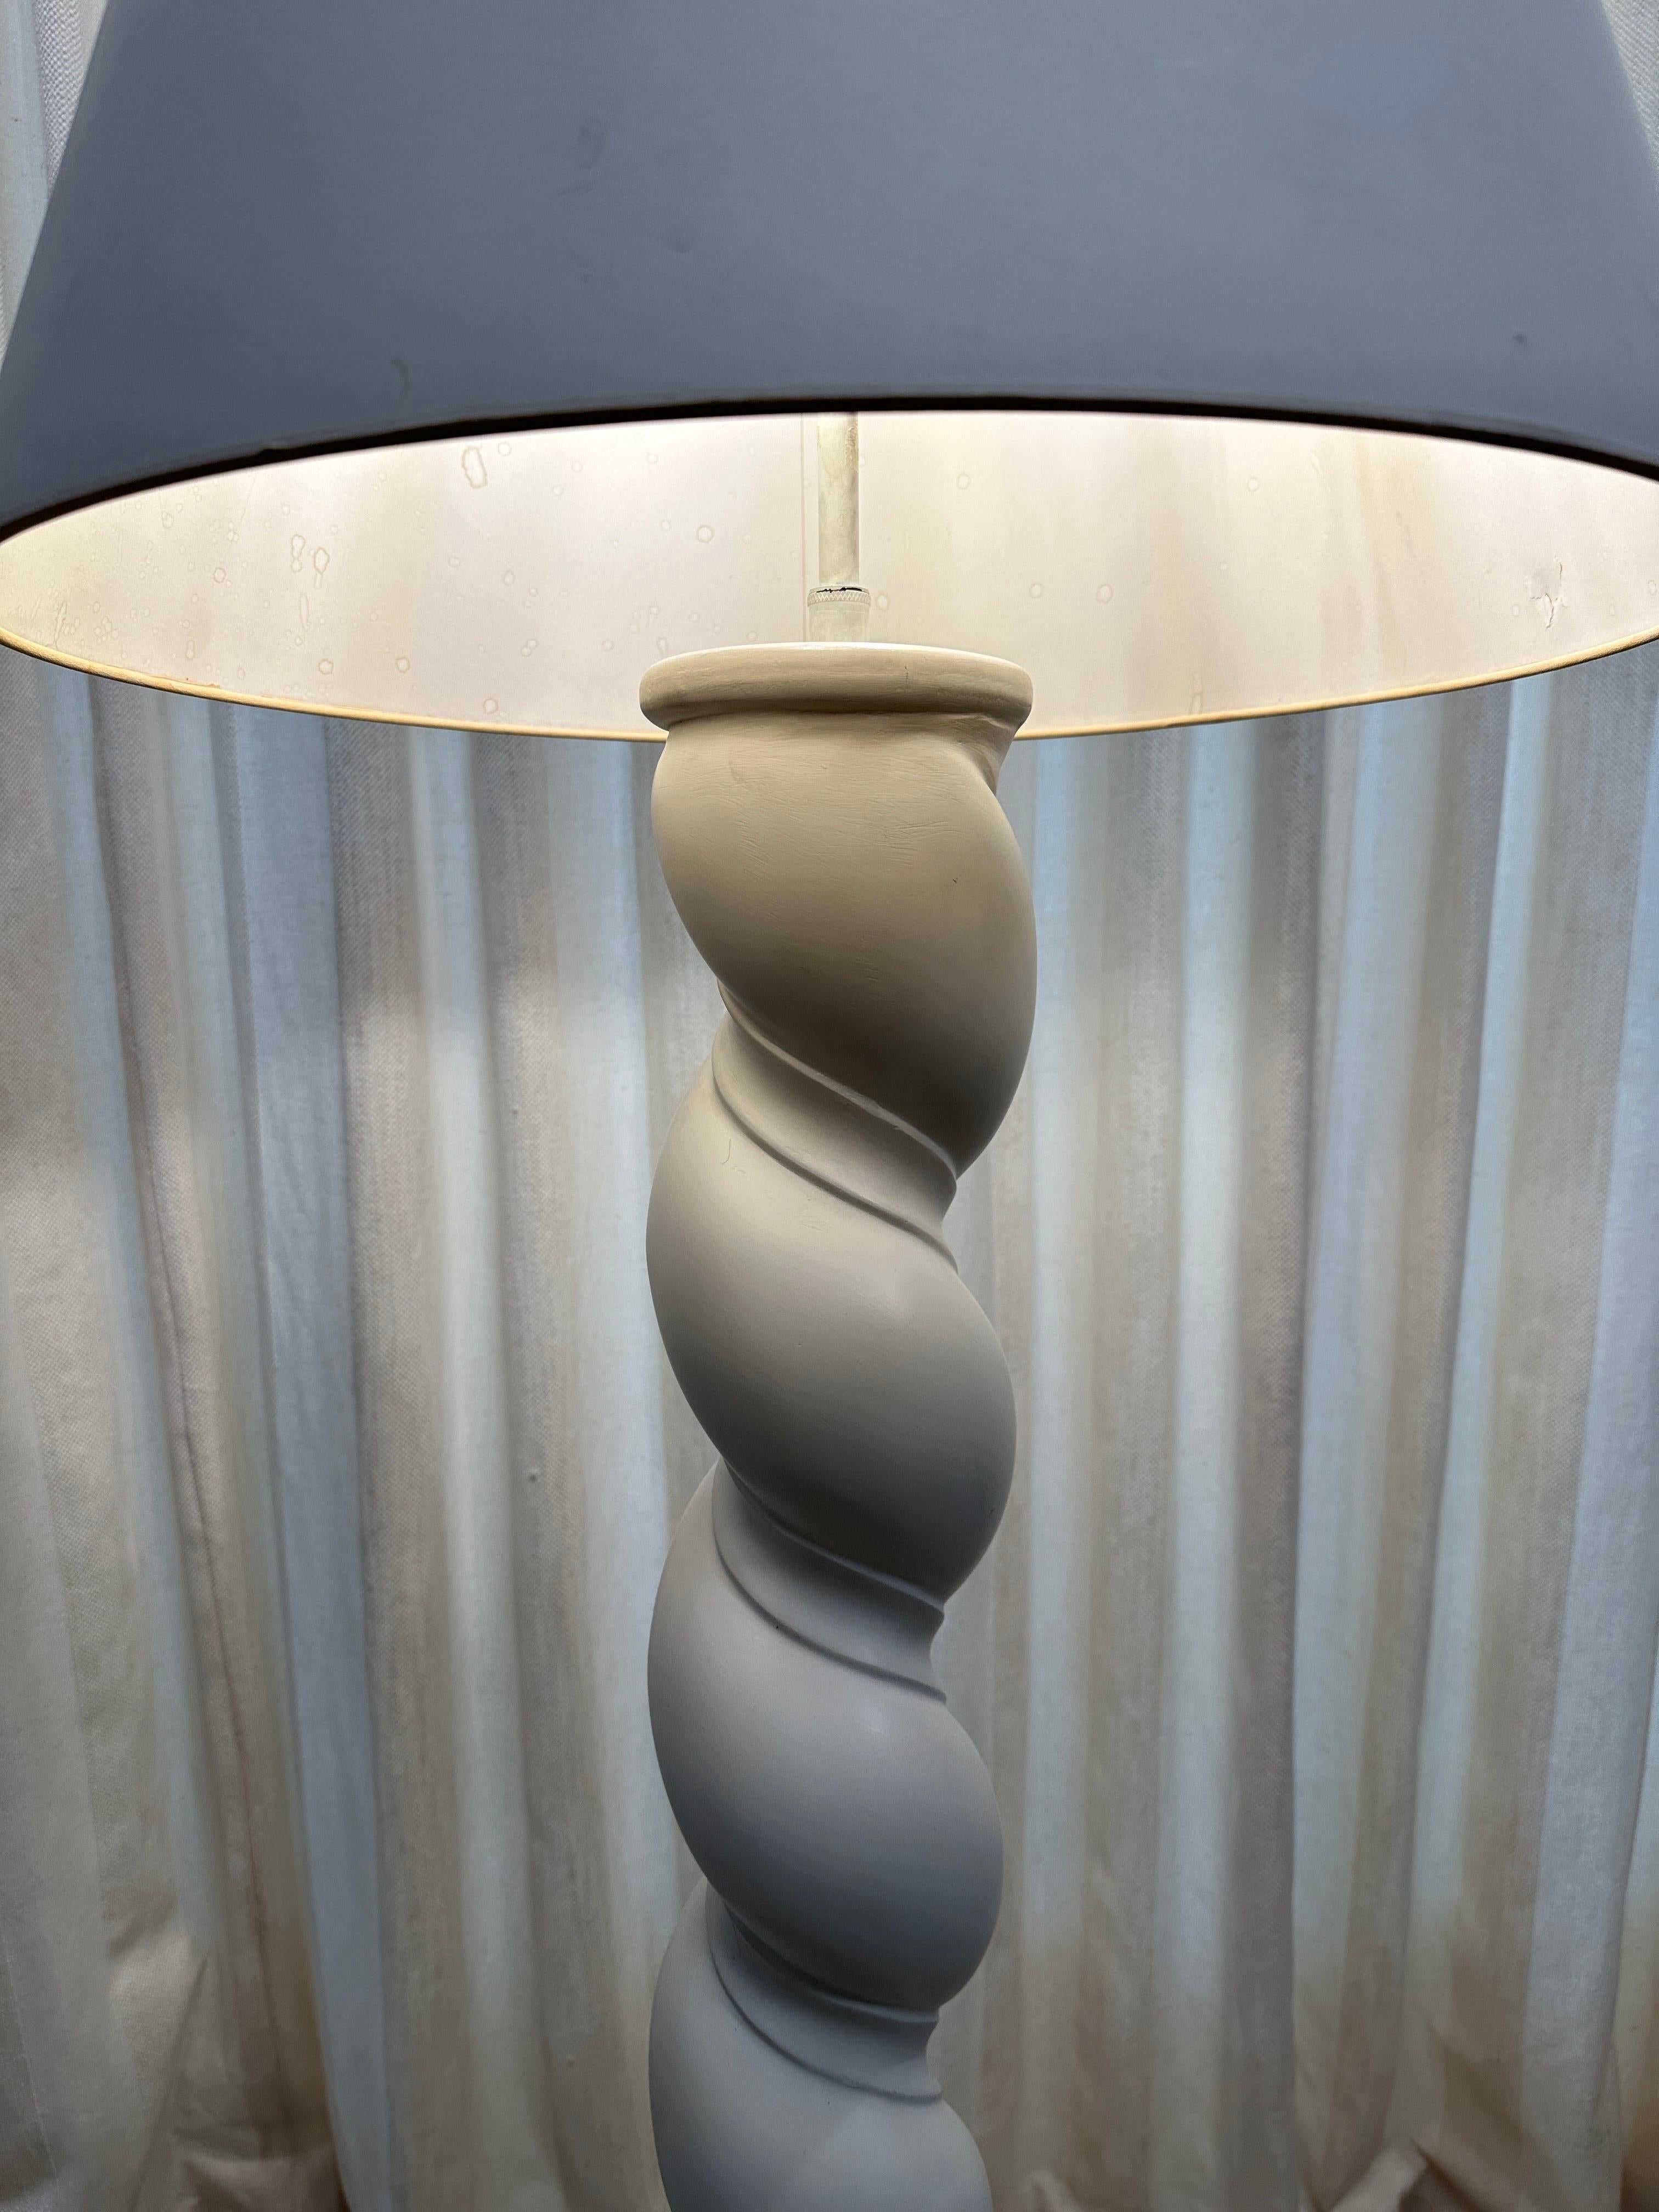 Extremely Rare Composition Plaster Floor Lamp w/ Spiraling Design by Sirmos For Sale 1